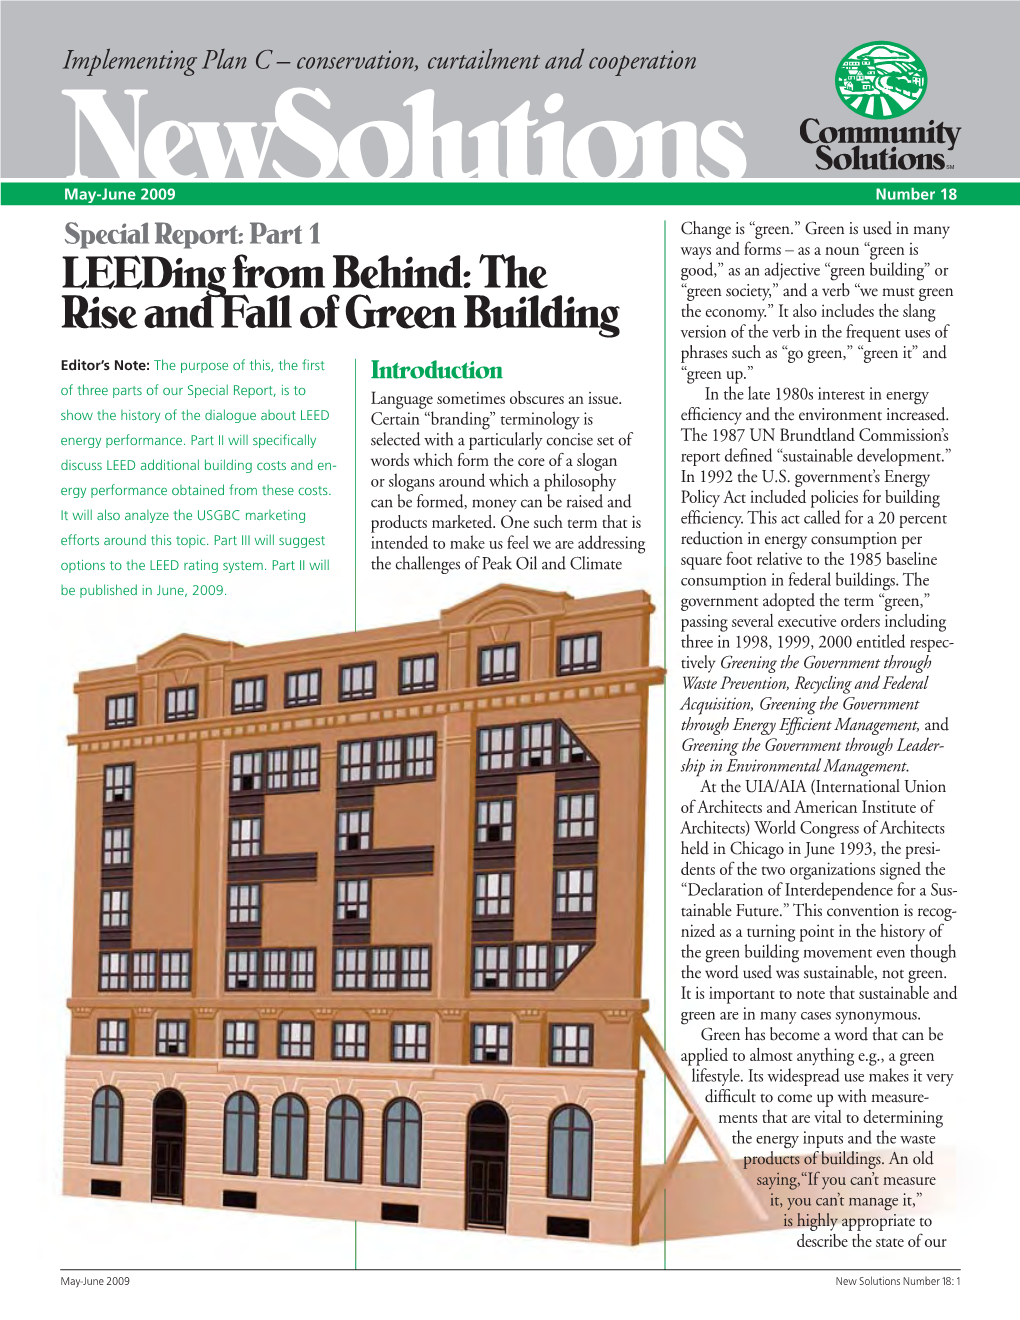 Leedingfrom Behind: the Rise and Fall of Green Building